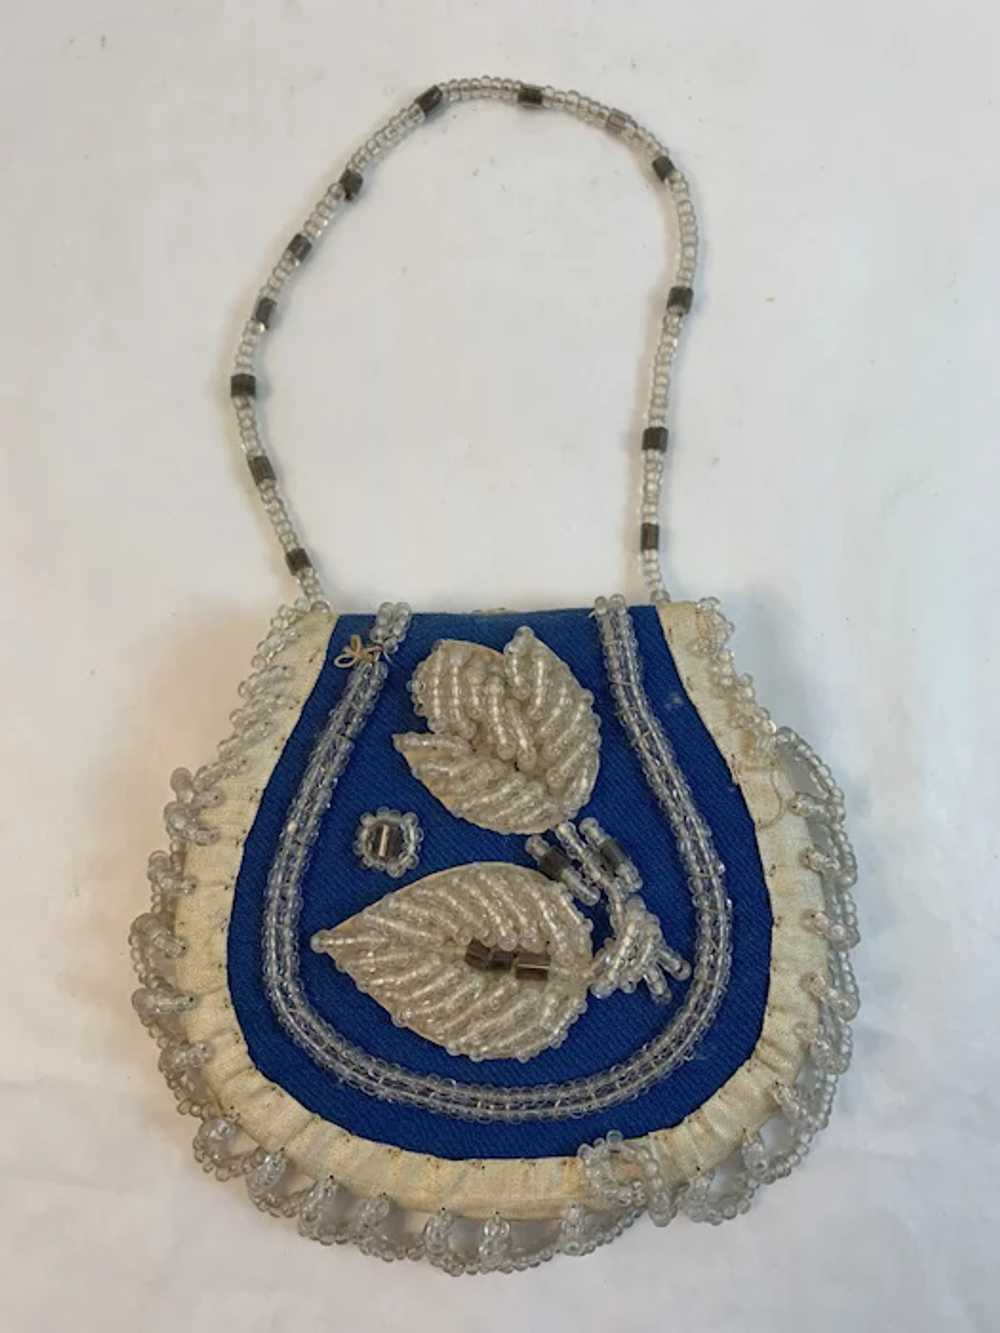 Beaded Cloth Purse Blue and White with Clear Beads - image 9